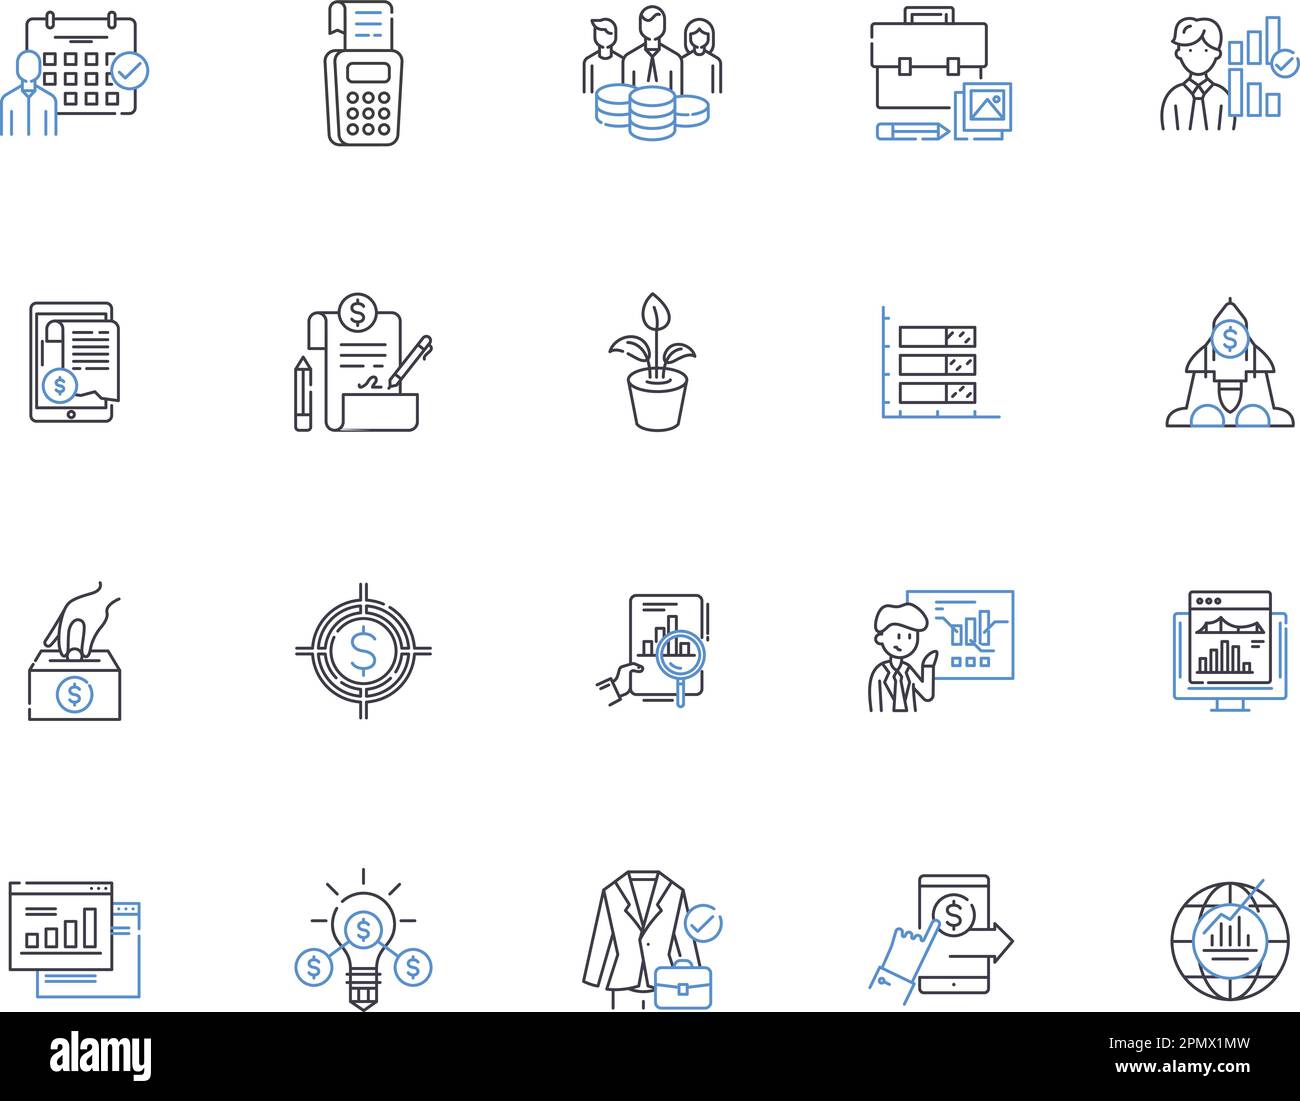 Accounting outline icons collection. Accounting, Bookkeeping, Reconciliation, Budgeting, Auditing, Taxes, CPA vector and illustration concept set Stock Vector